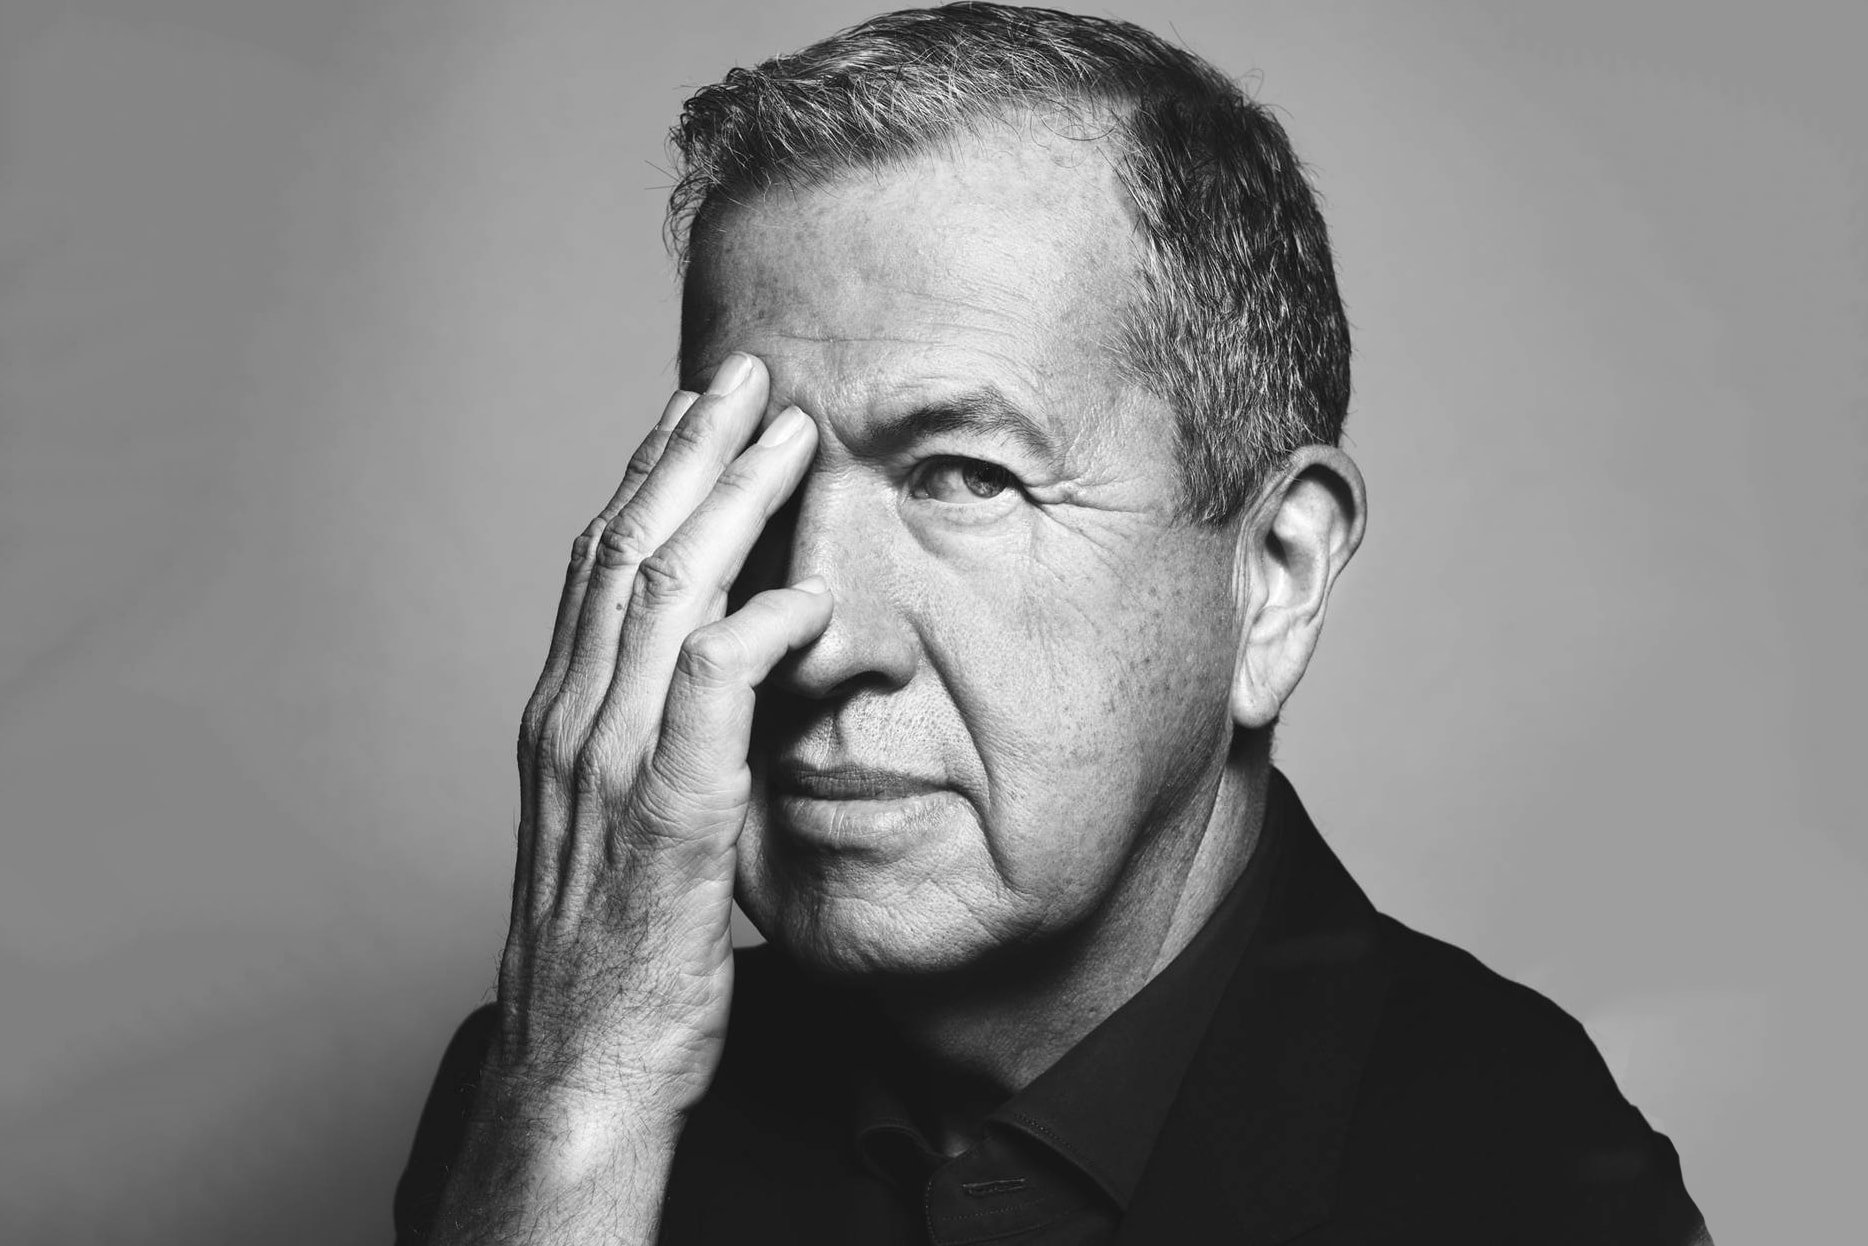 Mario Testino Bruce Weber Sexual Assault Misconduct Vogue Conde Nast Anna Wintour Photographer Code of Conduct Response Model Hollywood Entertainment Fashion Industry